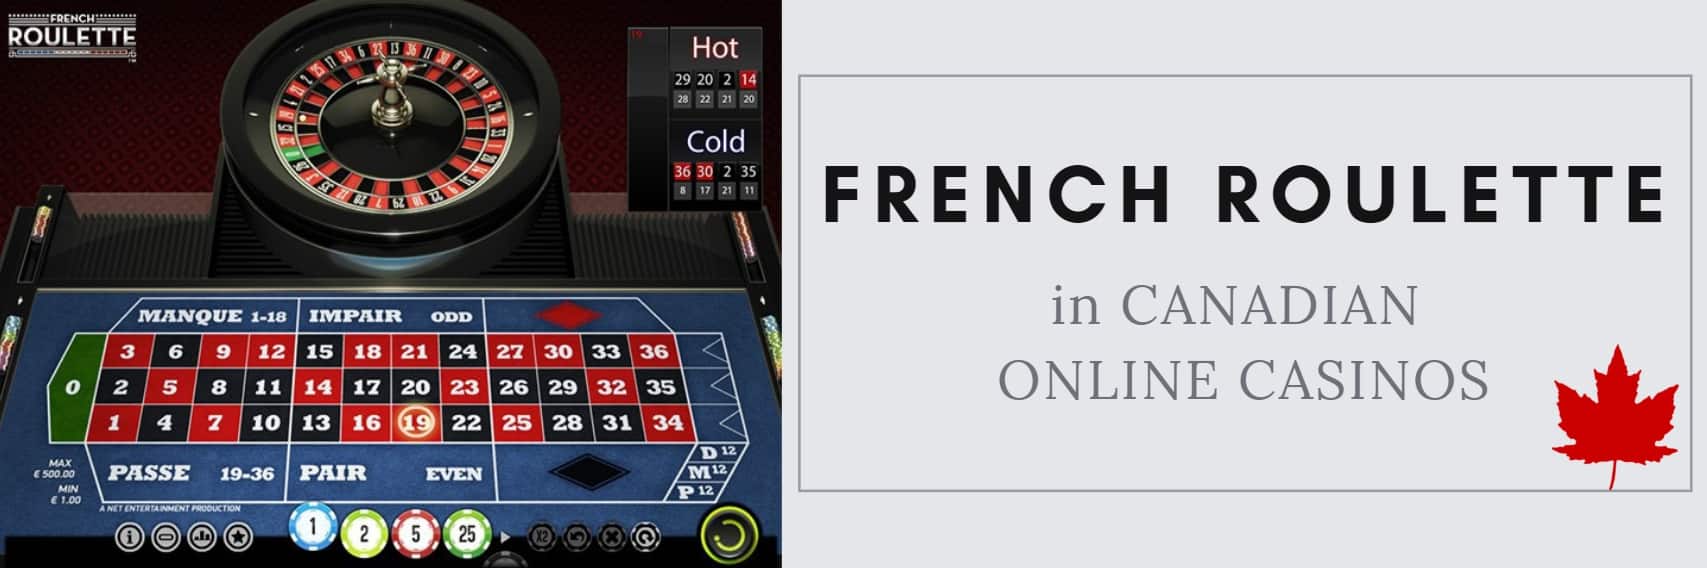 French Roulette Online Casino